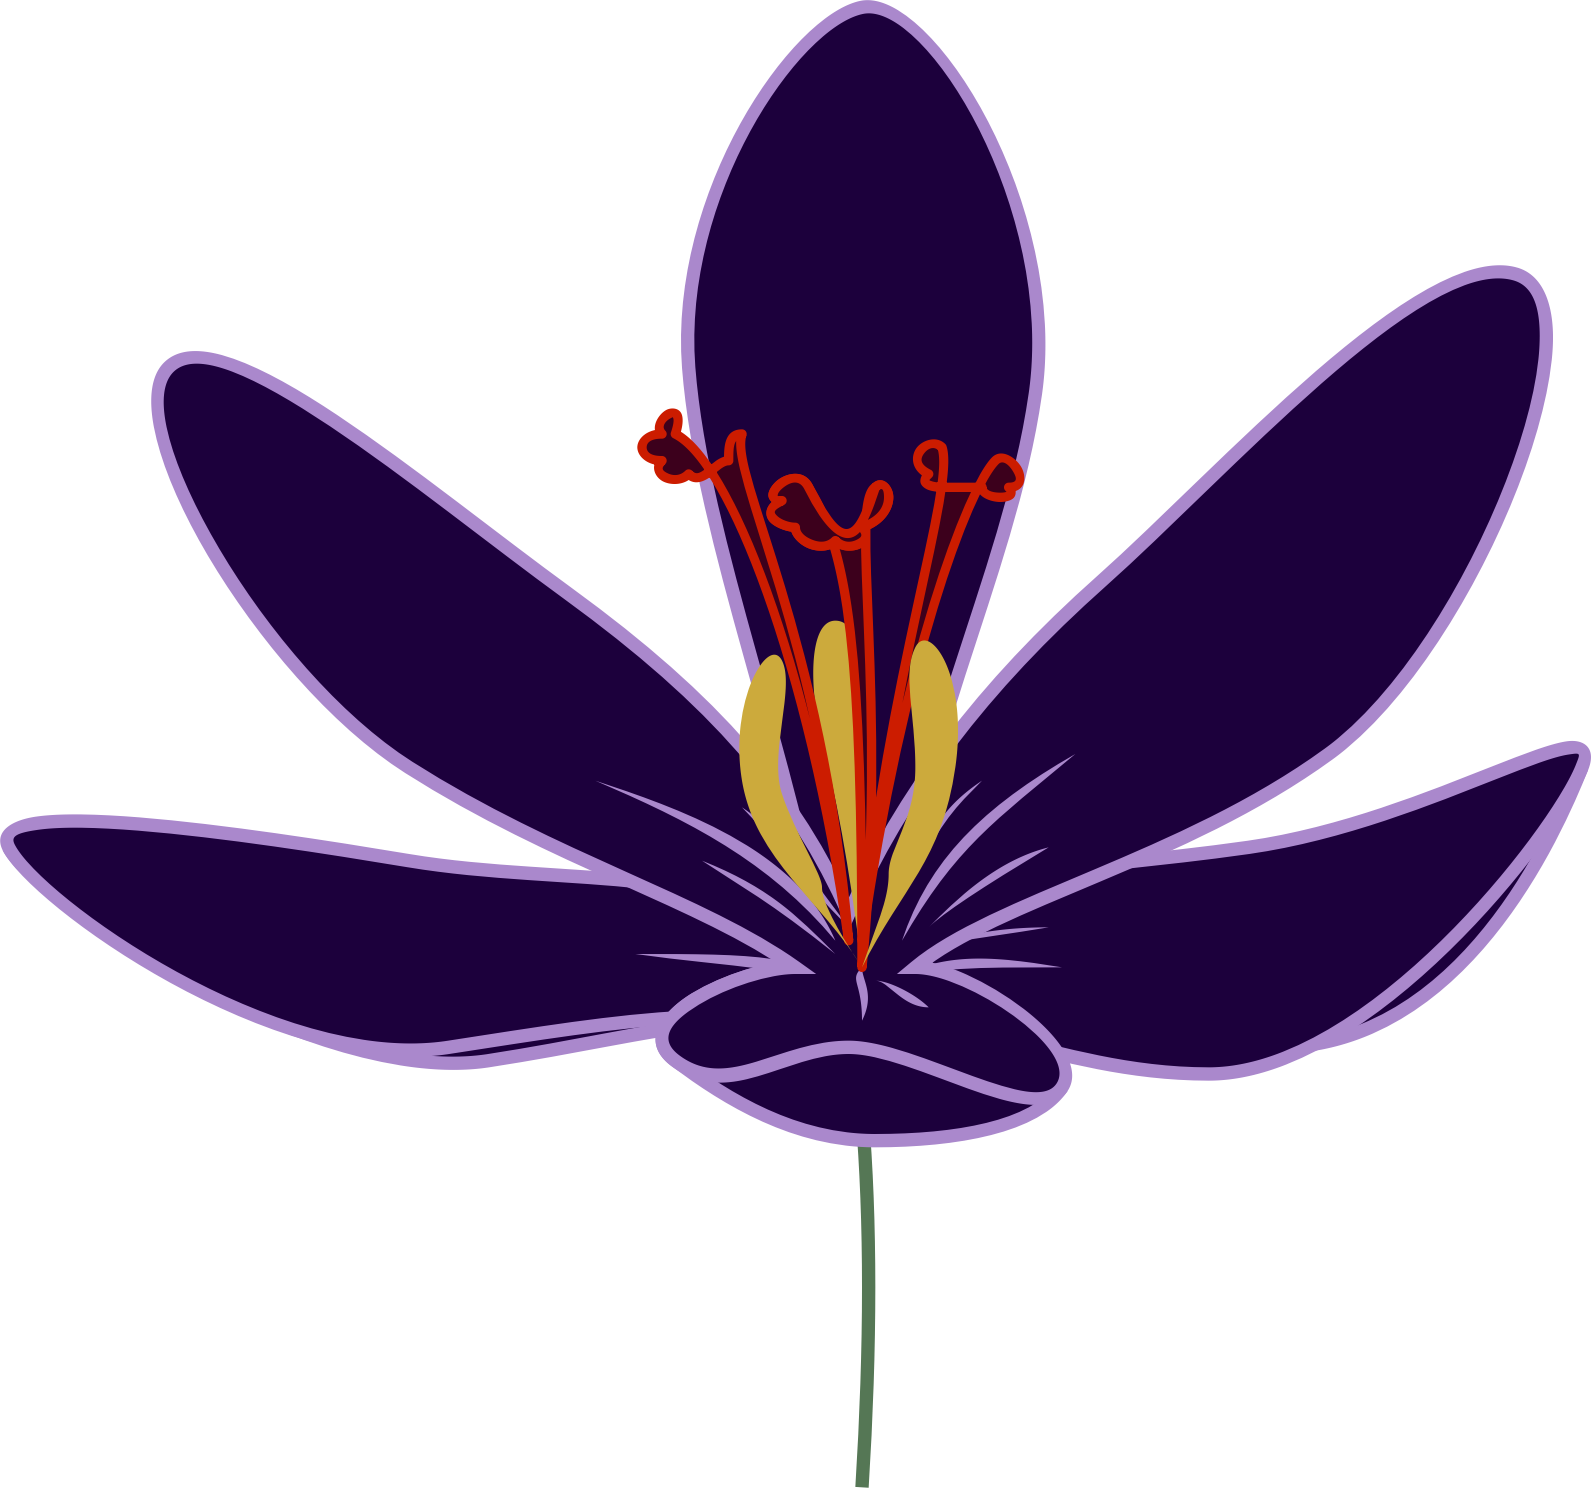 A Purple Flower With Yellow Stamens